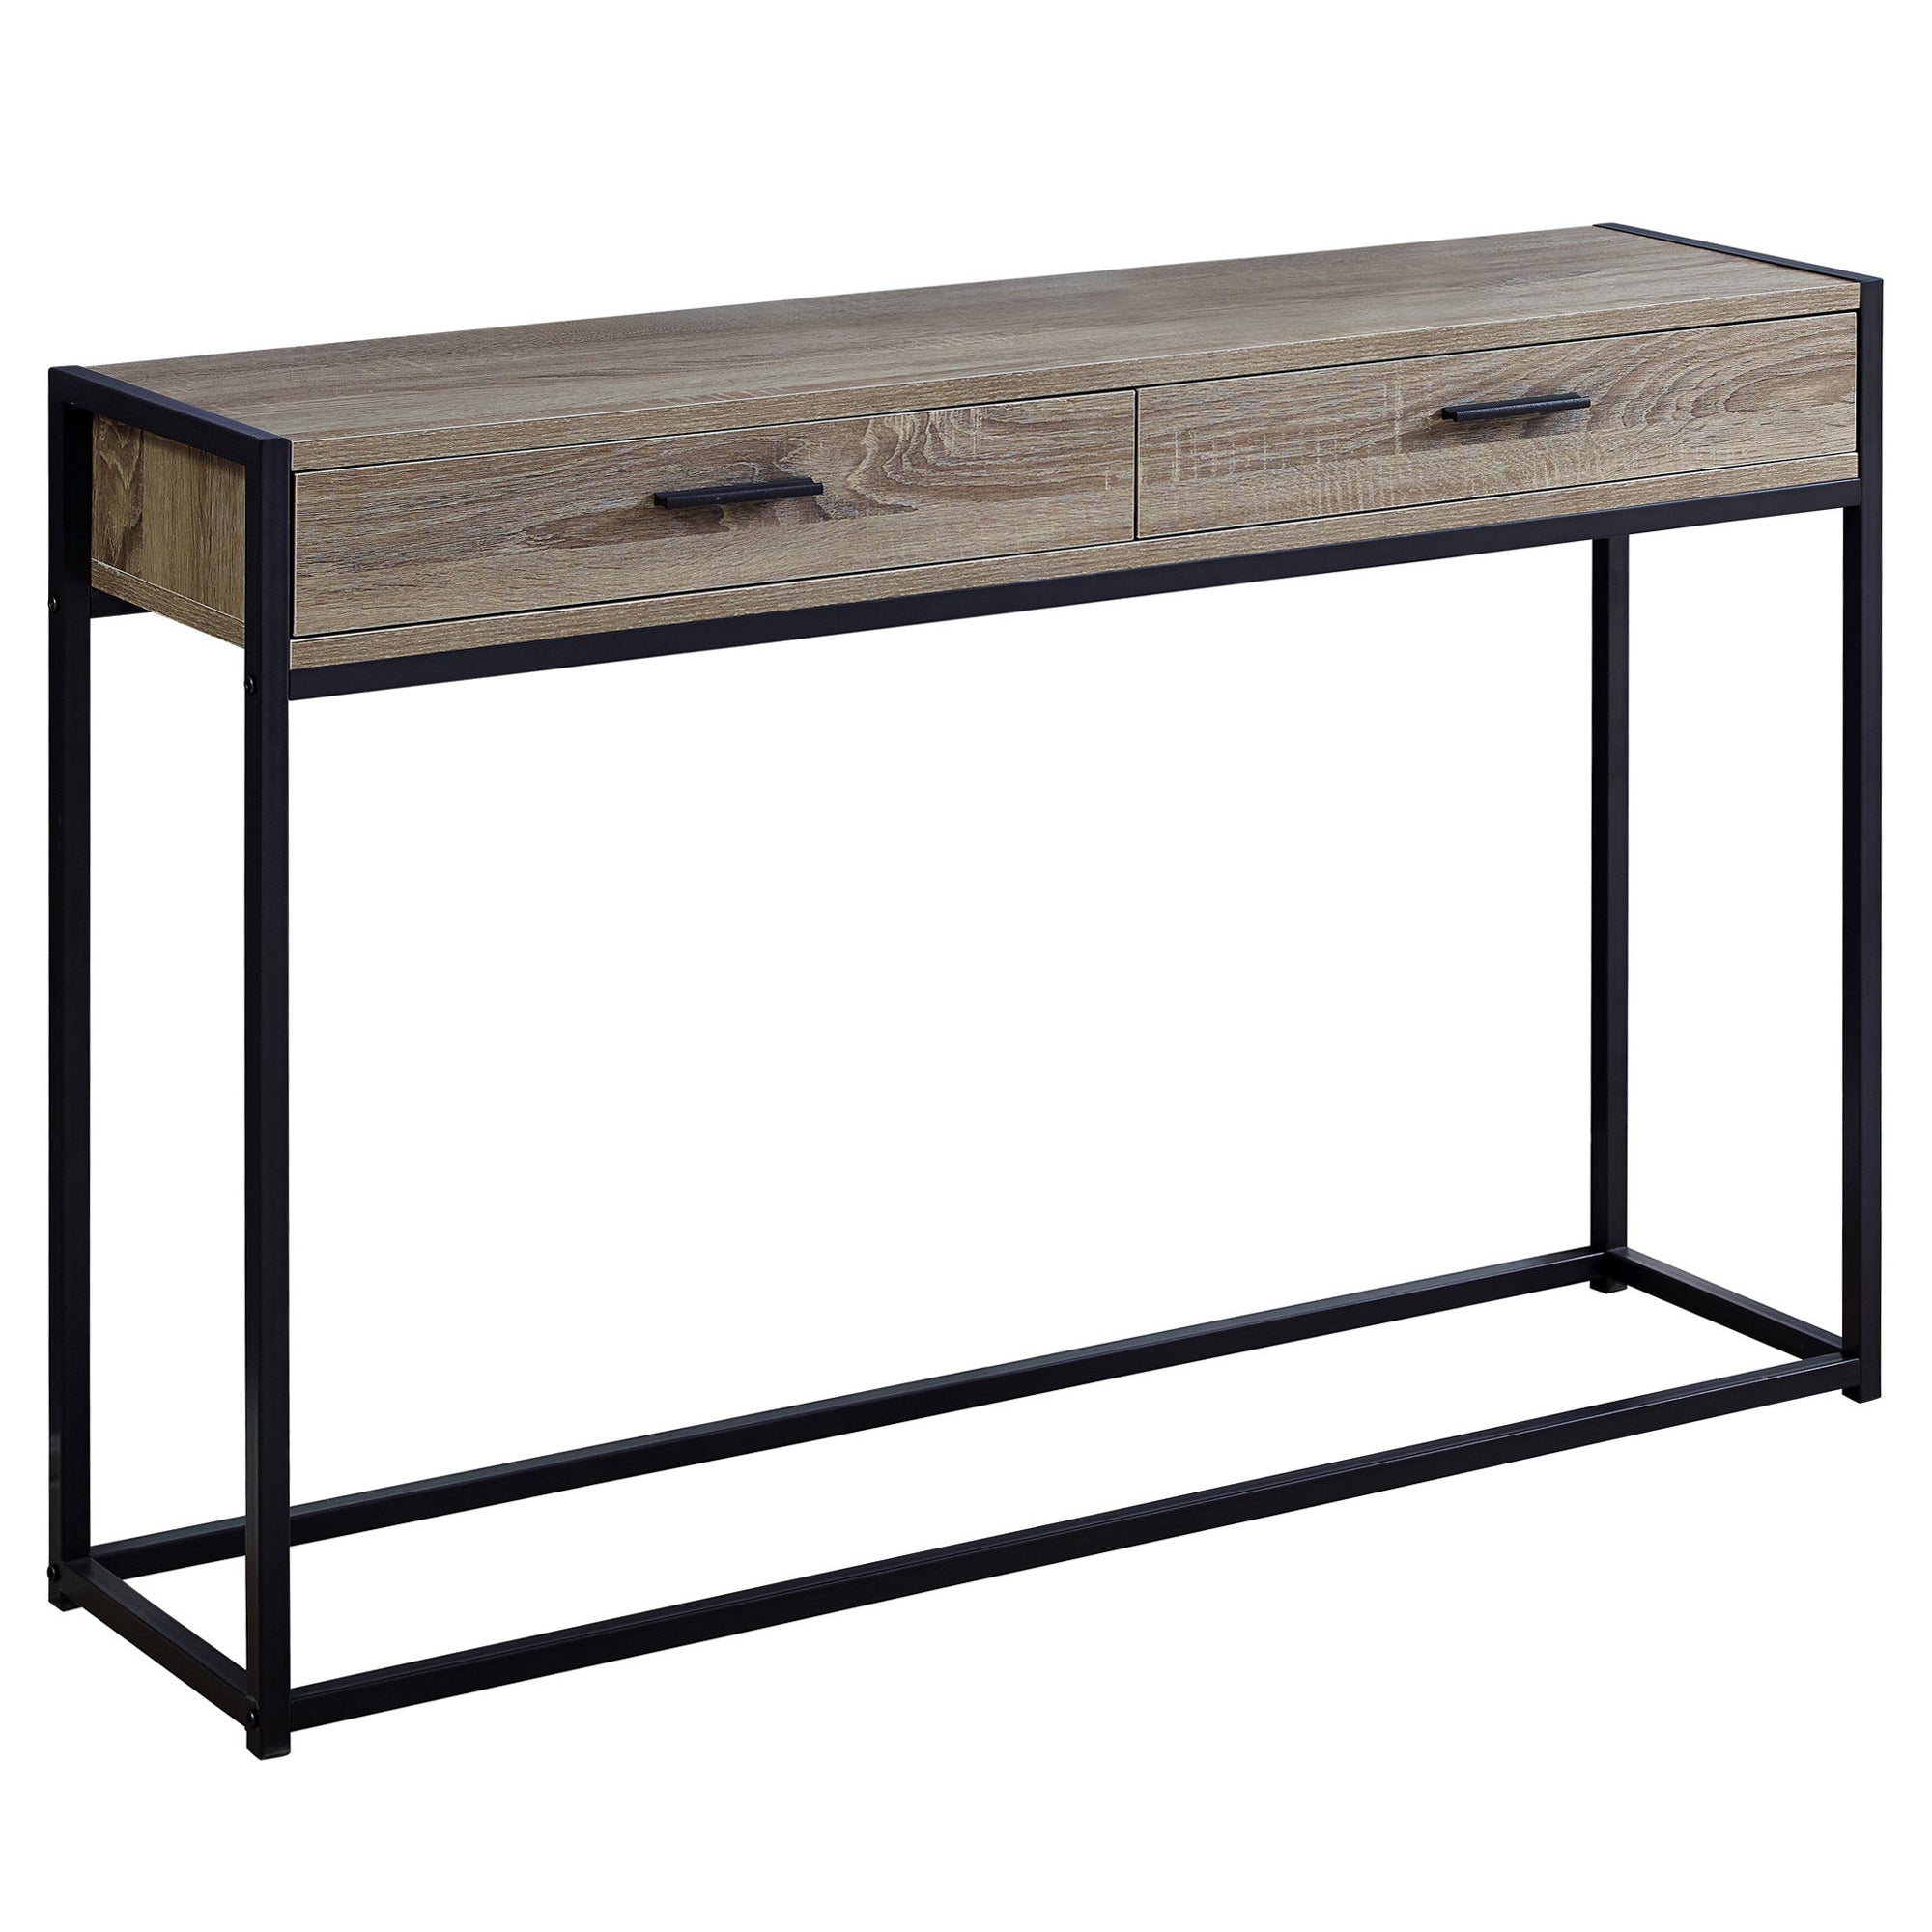 MN-153511    Accent Table, Console, Entryway, Narrow, Sofa, Living Room, Bedroom, Metal Frame, Laminate, Dark Taupe, Black, Contemporary, Modern